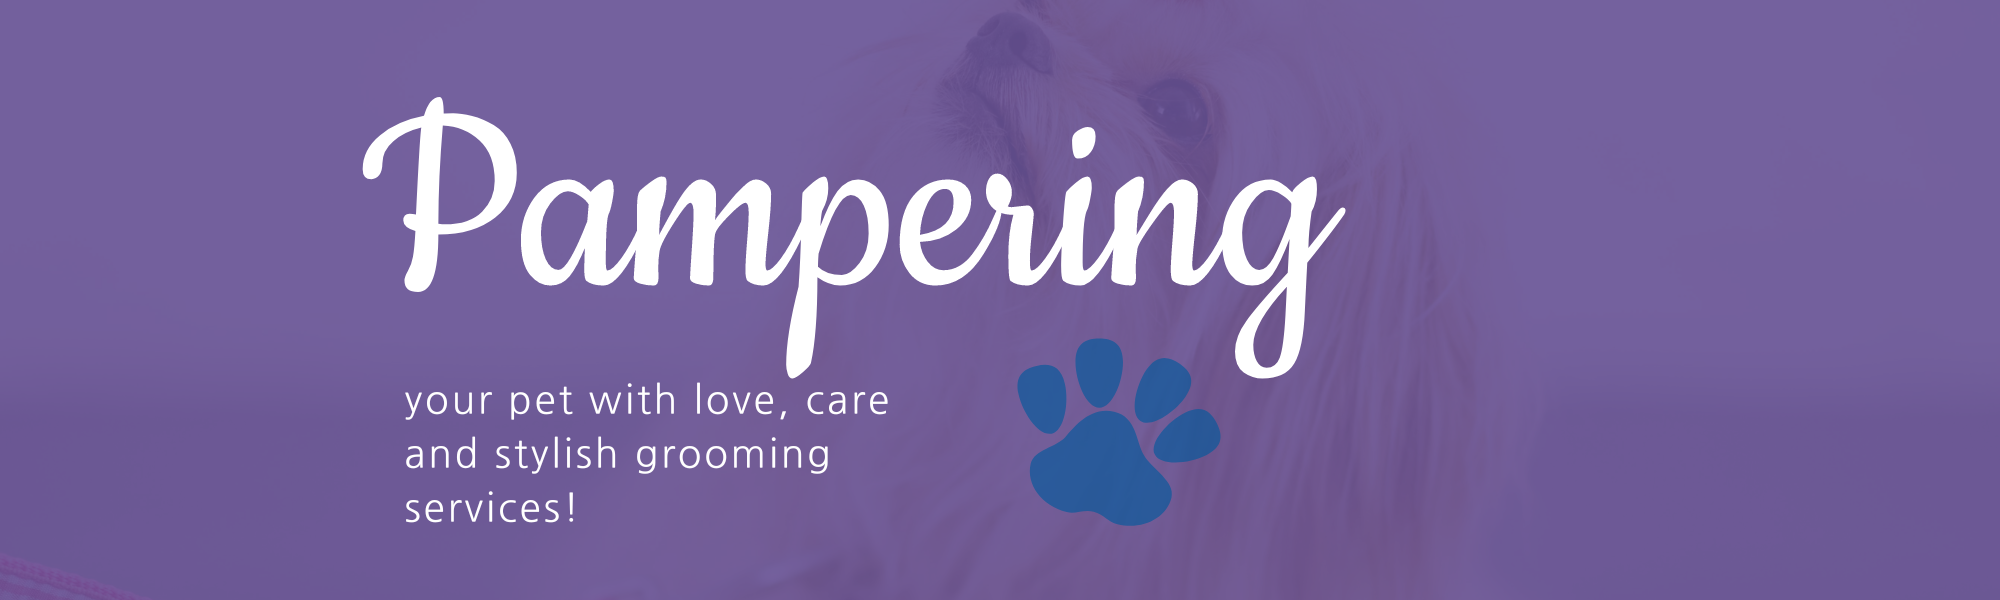 Pampering your pet!